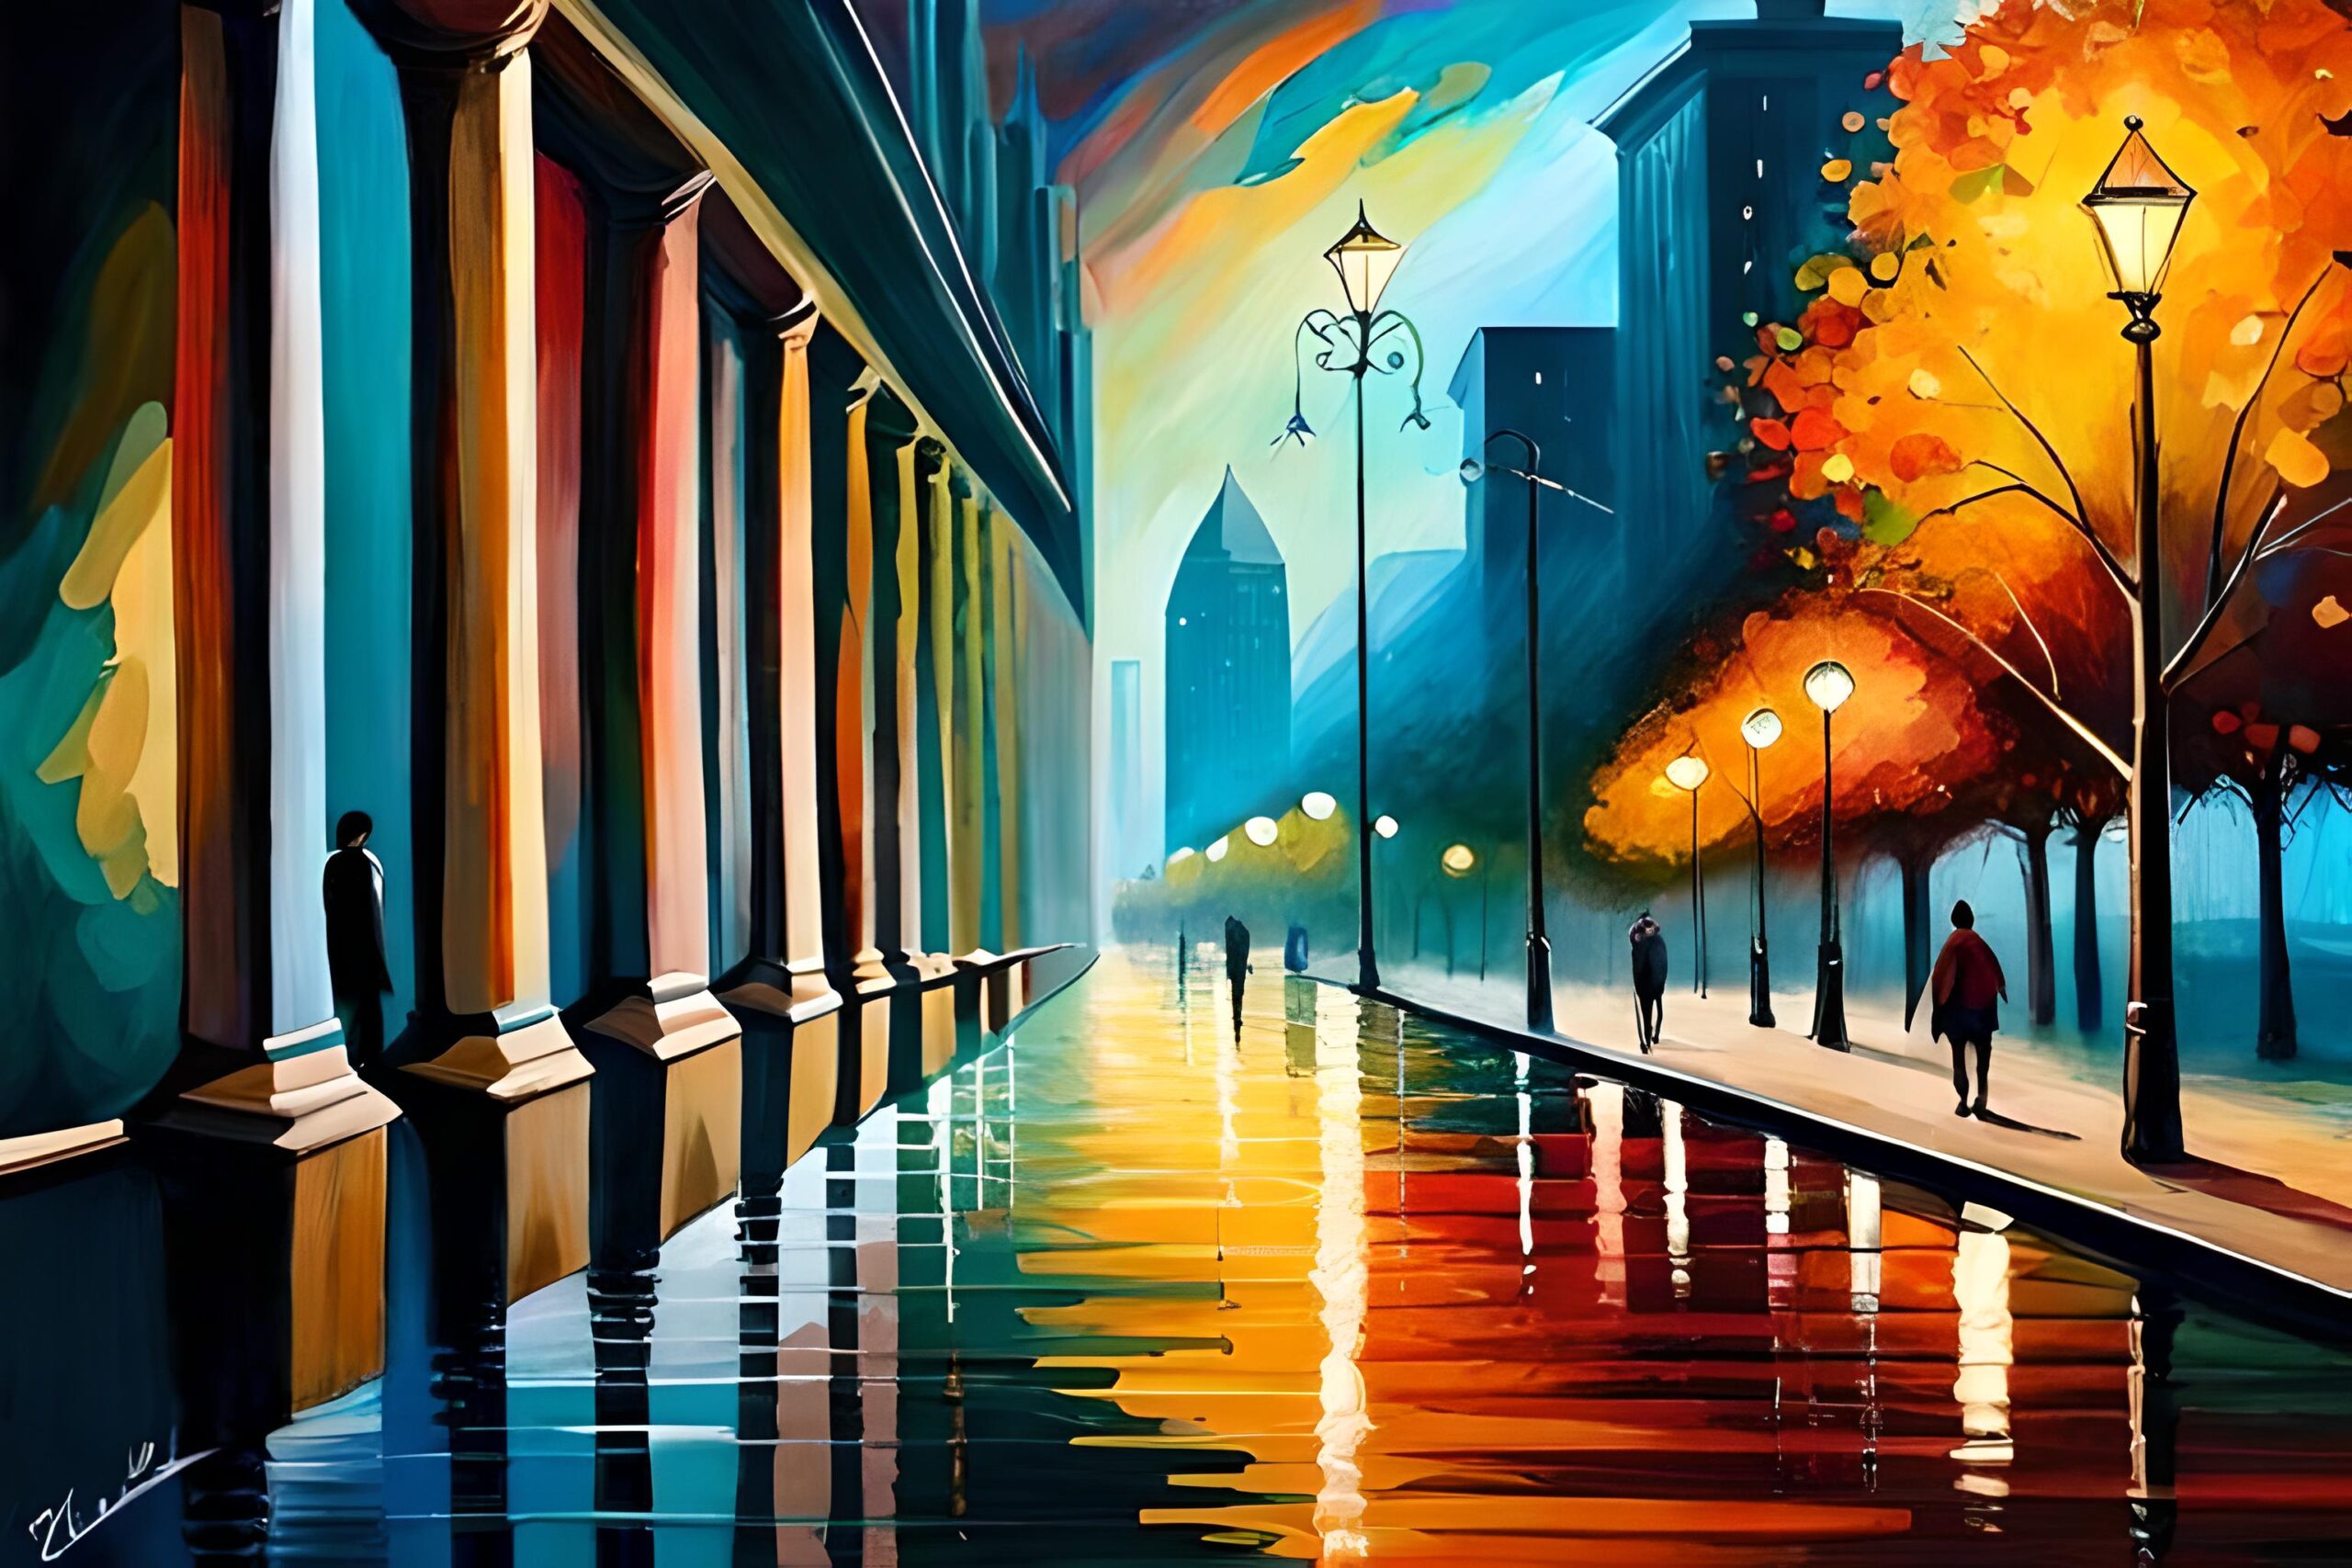 colourful oil painting, cityscape, abstract art, bright and bold colours person walking, buildings and street lamps, rainy painting.